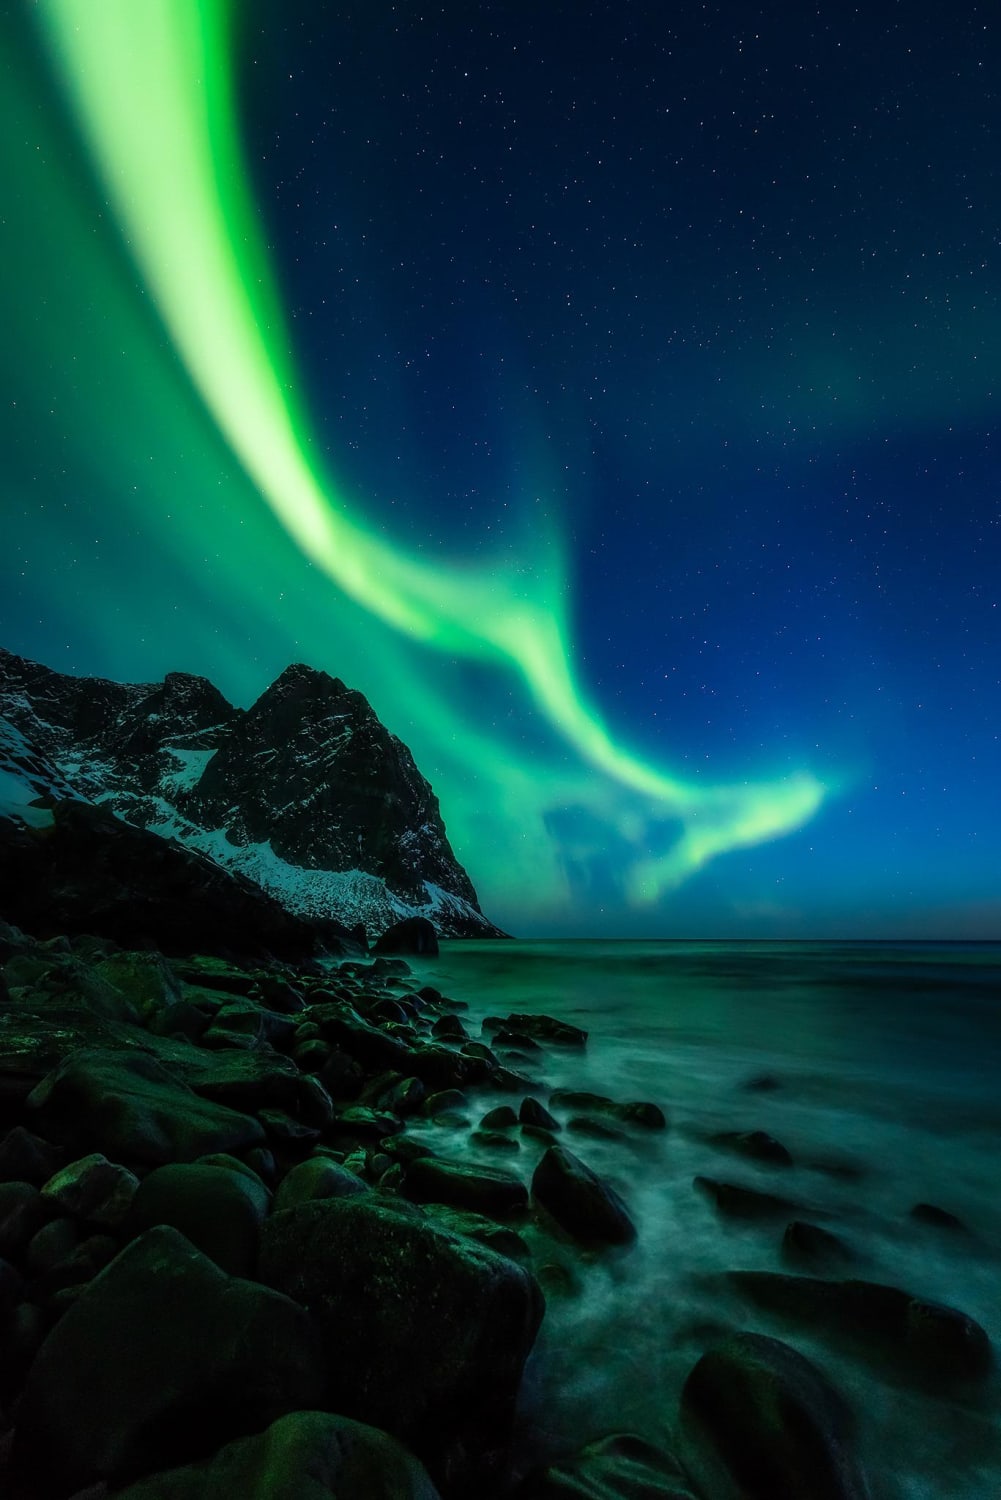 Green flames on the blue vernal night sky, and grumbled pieces of the mighty mountains, pounded and shaped by the endless great open ocean waves. Lofoten, Norway 04/2018 @mpxmark